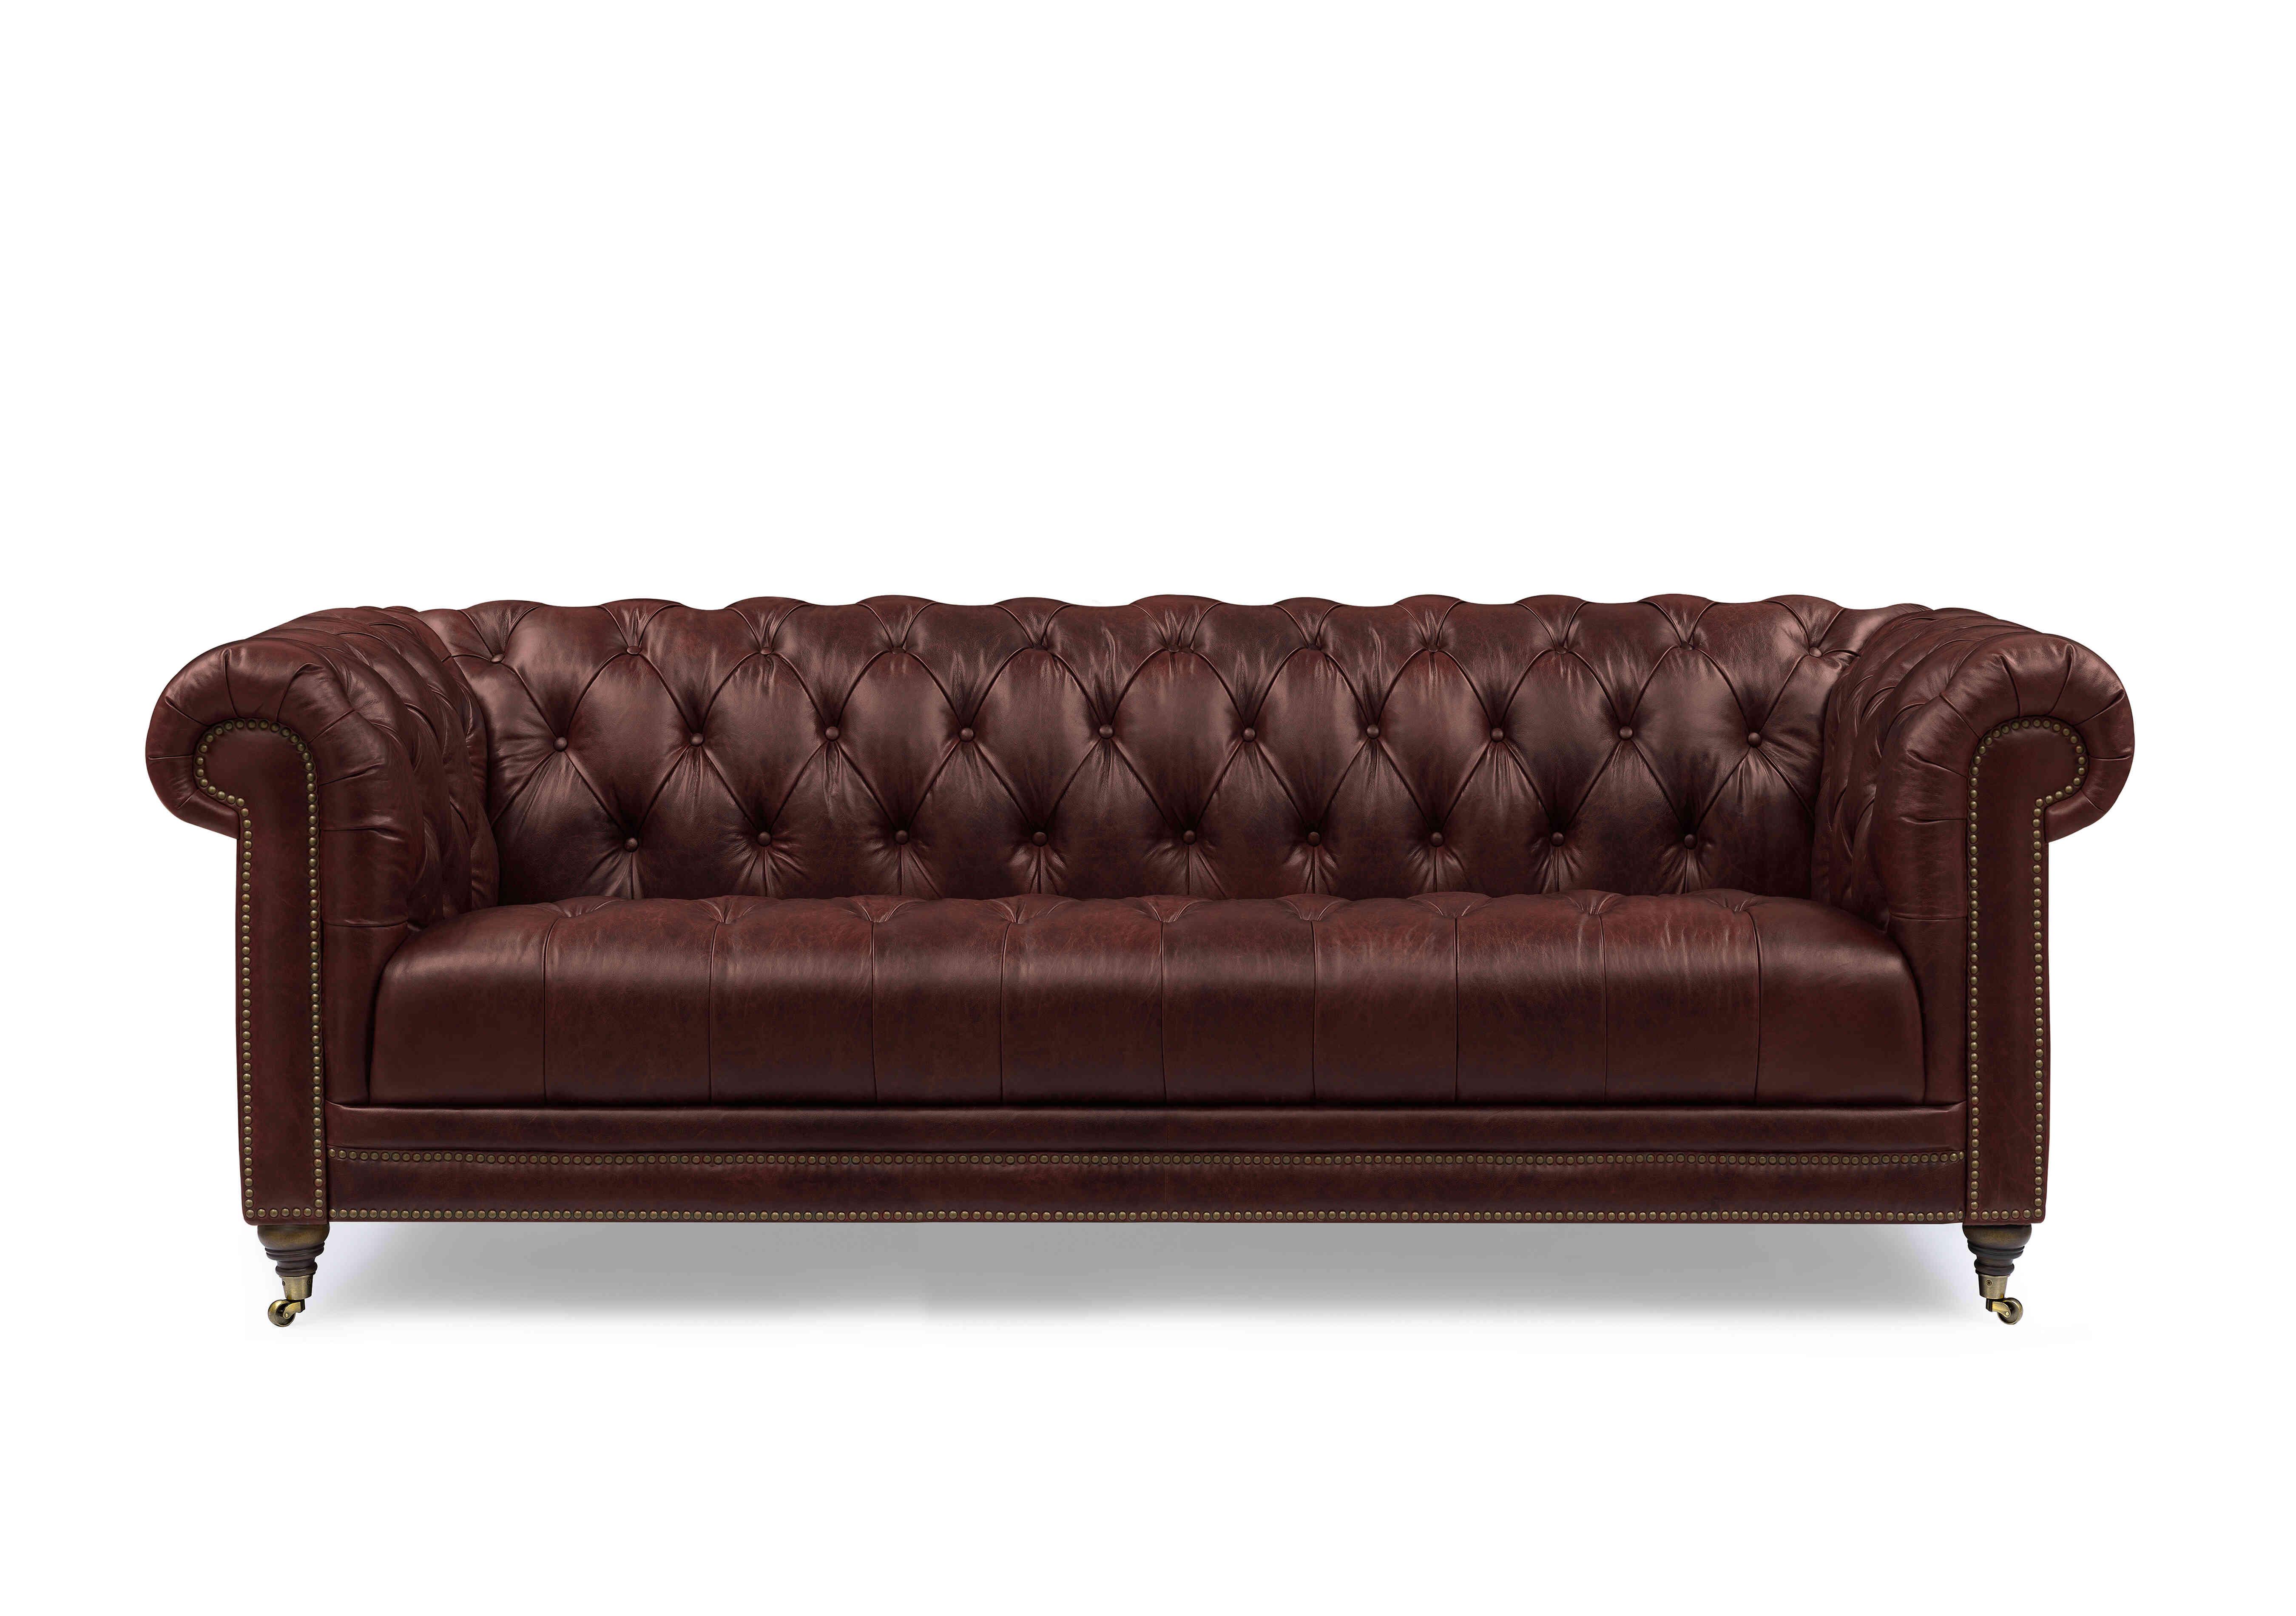 Walter 4 Seater Leather Chesterfield Sofa with USB-C in X3y1-1964ls Merlot on Furniture Village